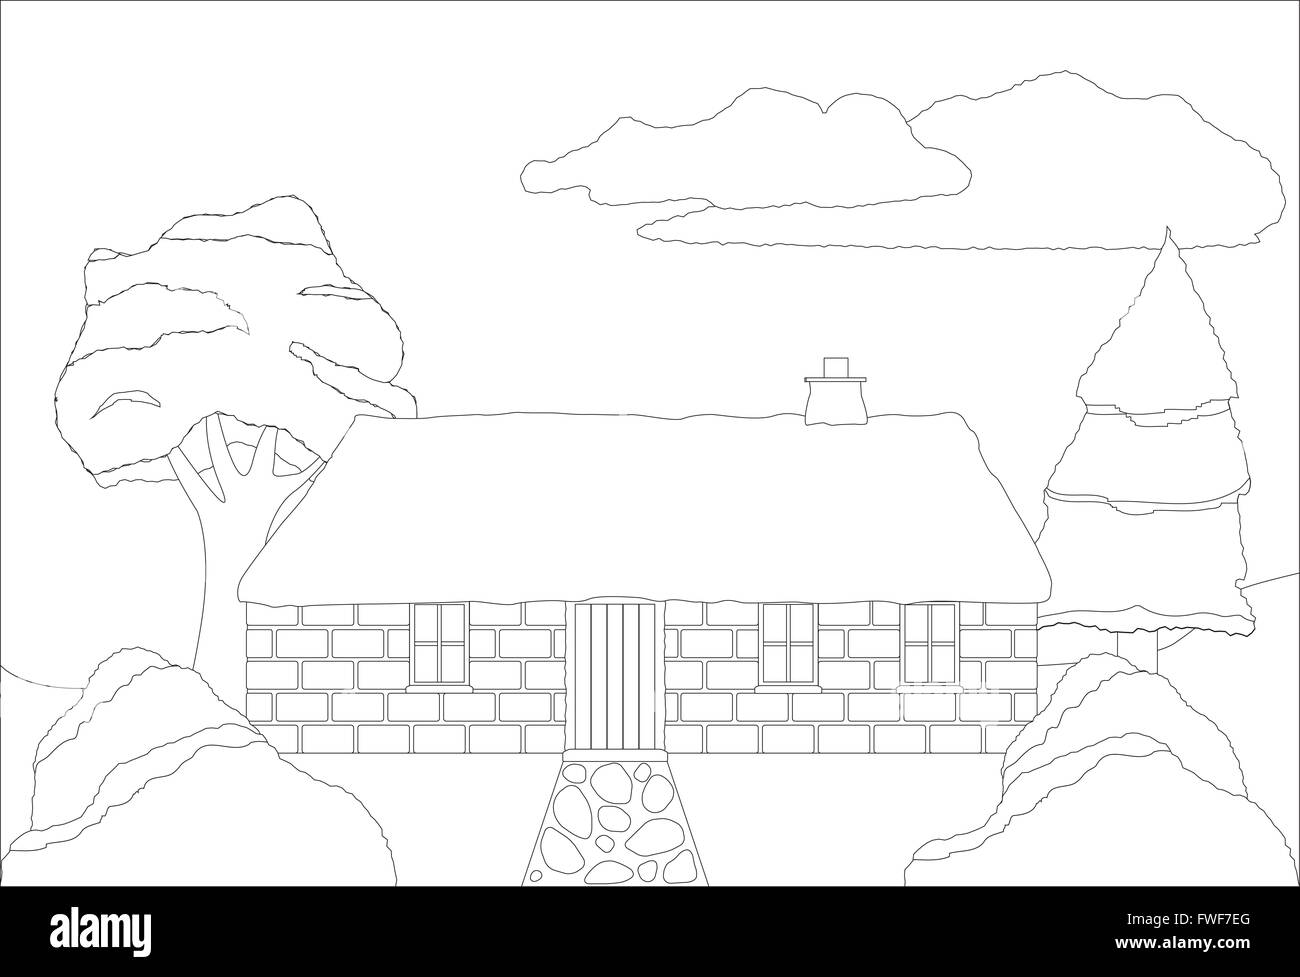 A cottage in the countryside colouring in page Stock Photo